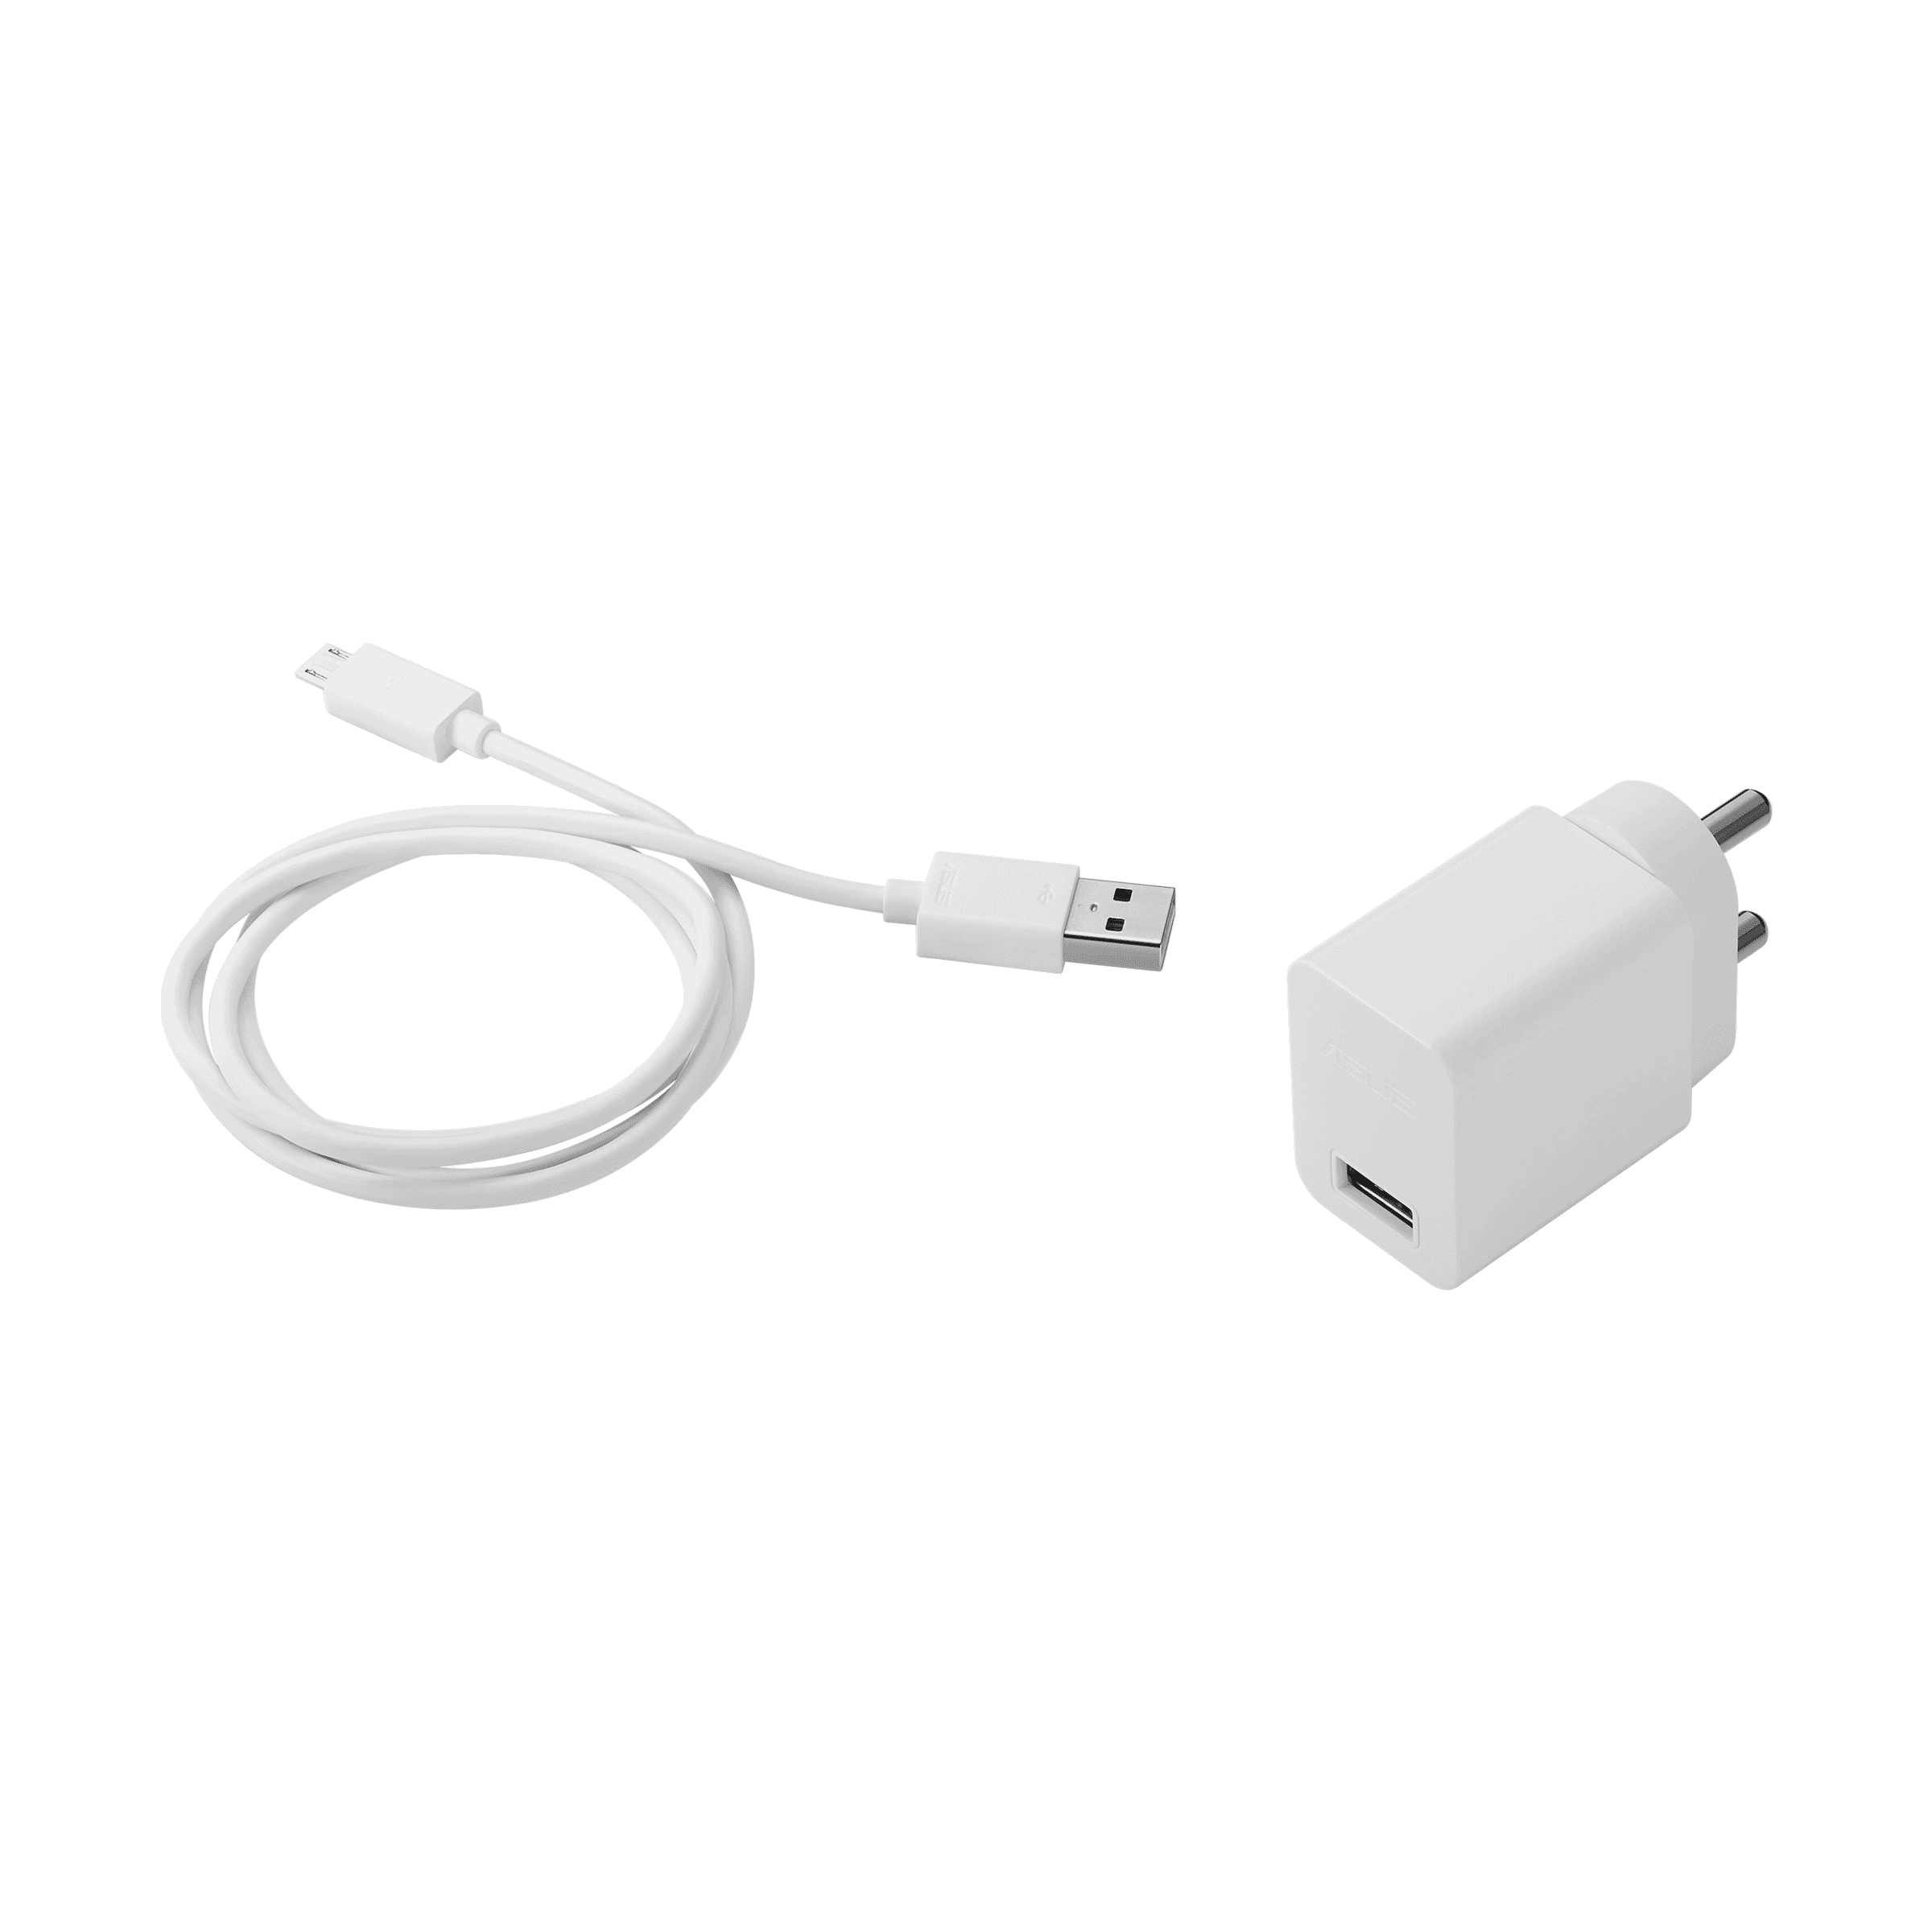 2A USB AC Wall Power Charger Adapter+USB Cord For Asus ZenPad 3S 10 Z500M Tablet 